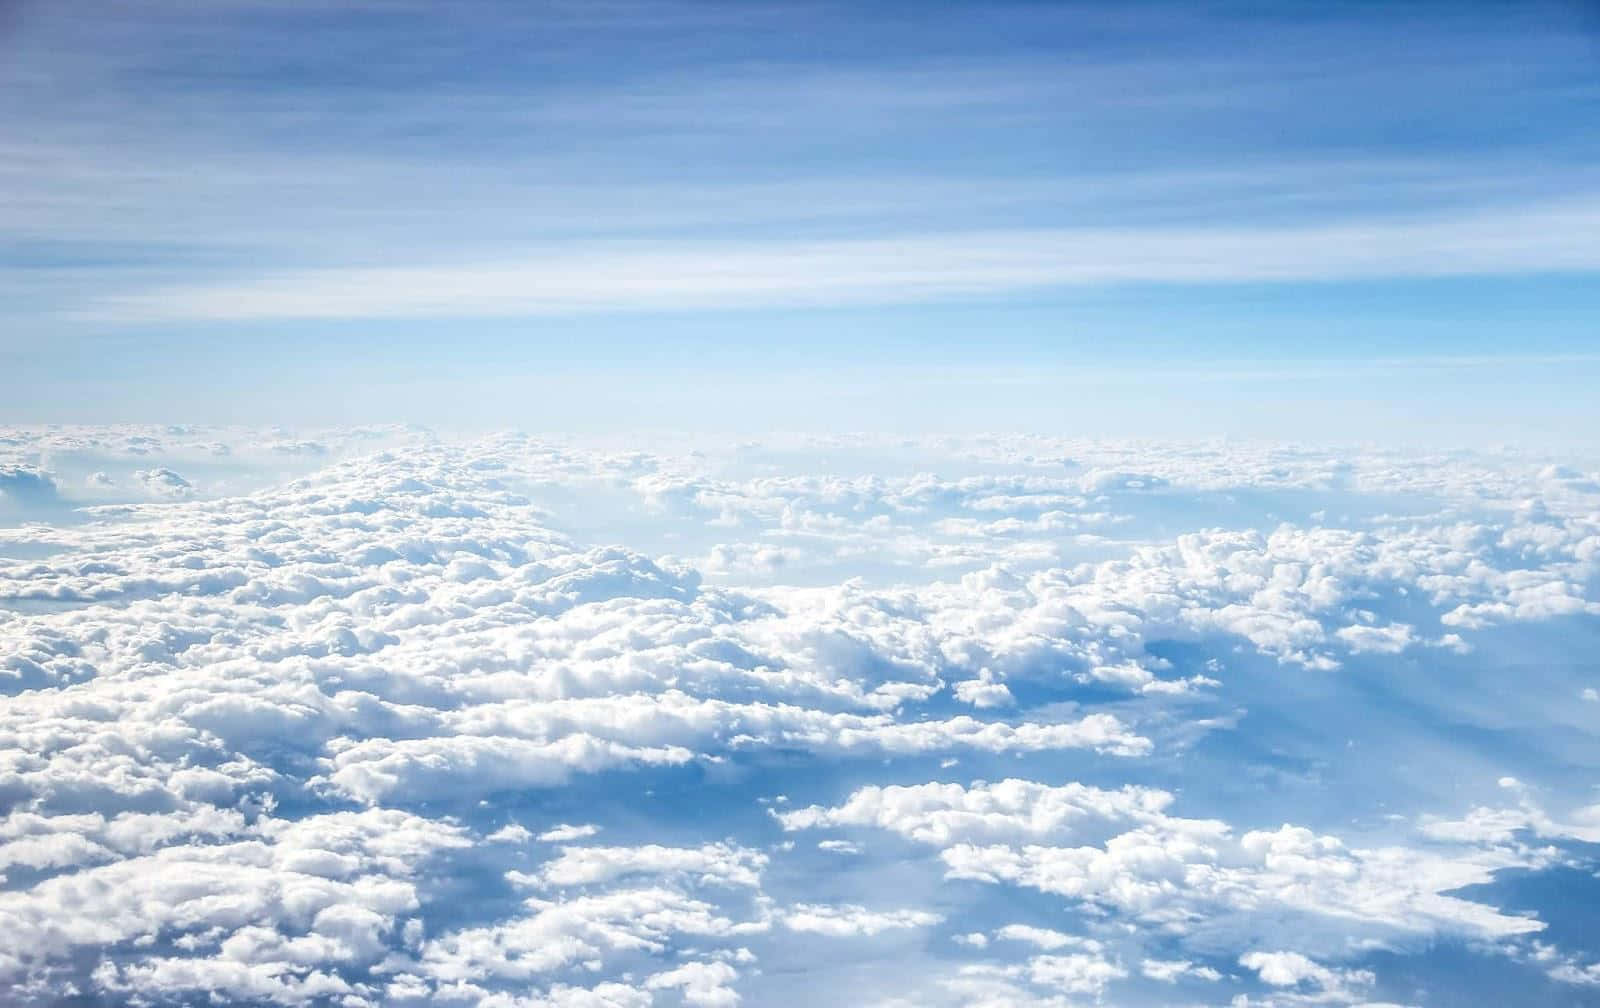 A View Of Clouds From An Airplane Window Wallpaper